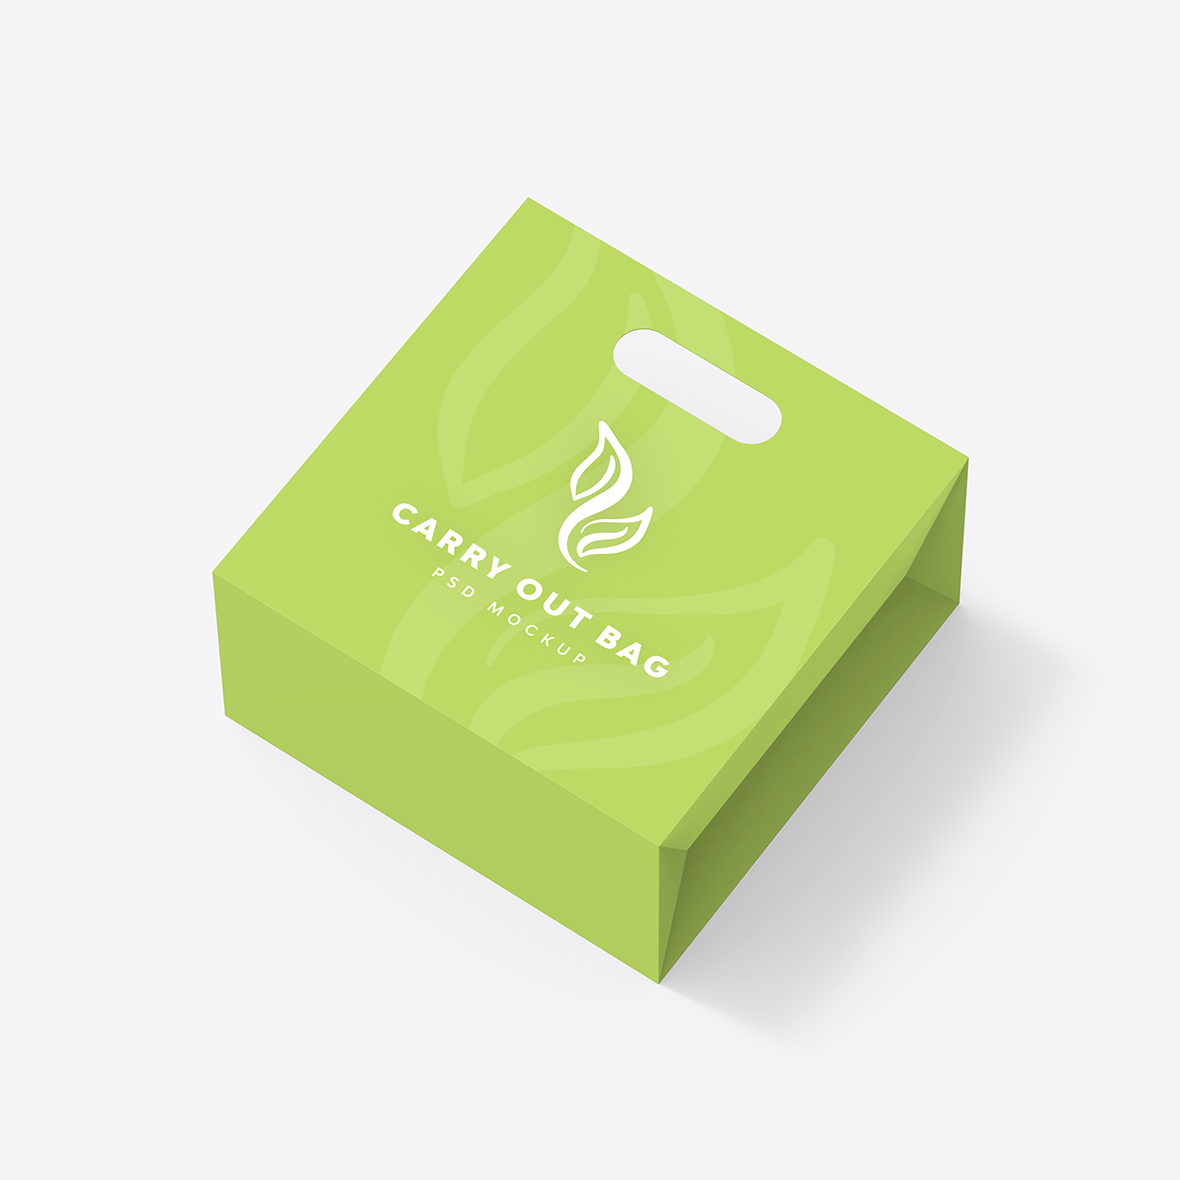 Carry Out Bag Mockup